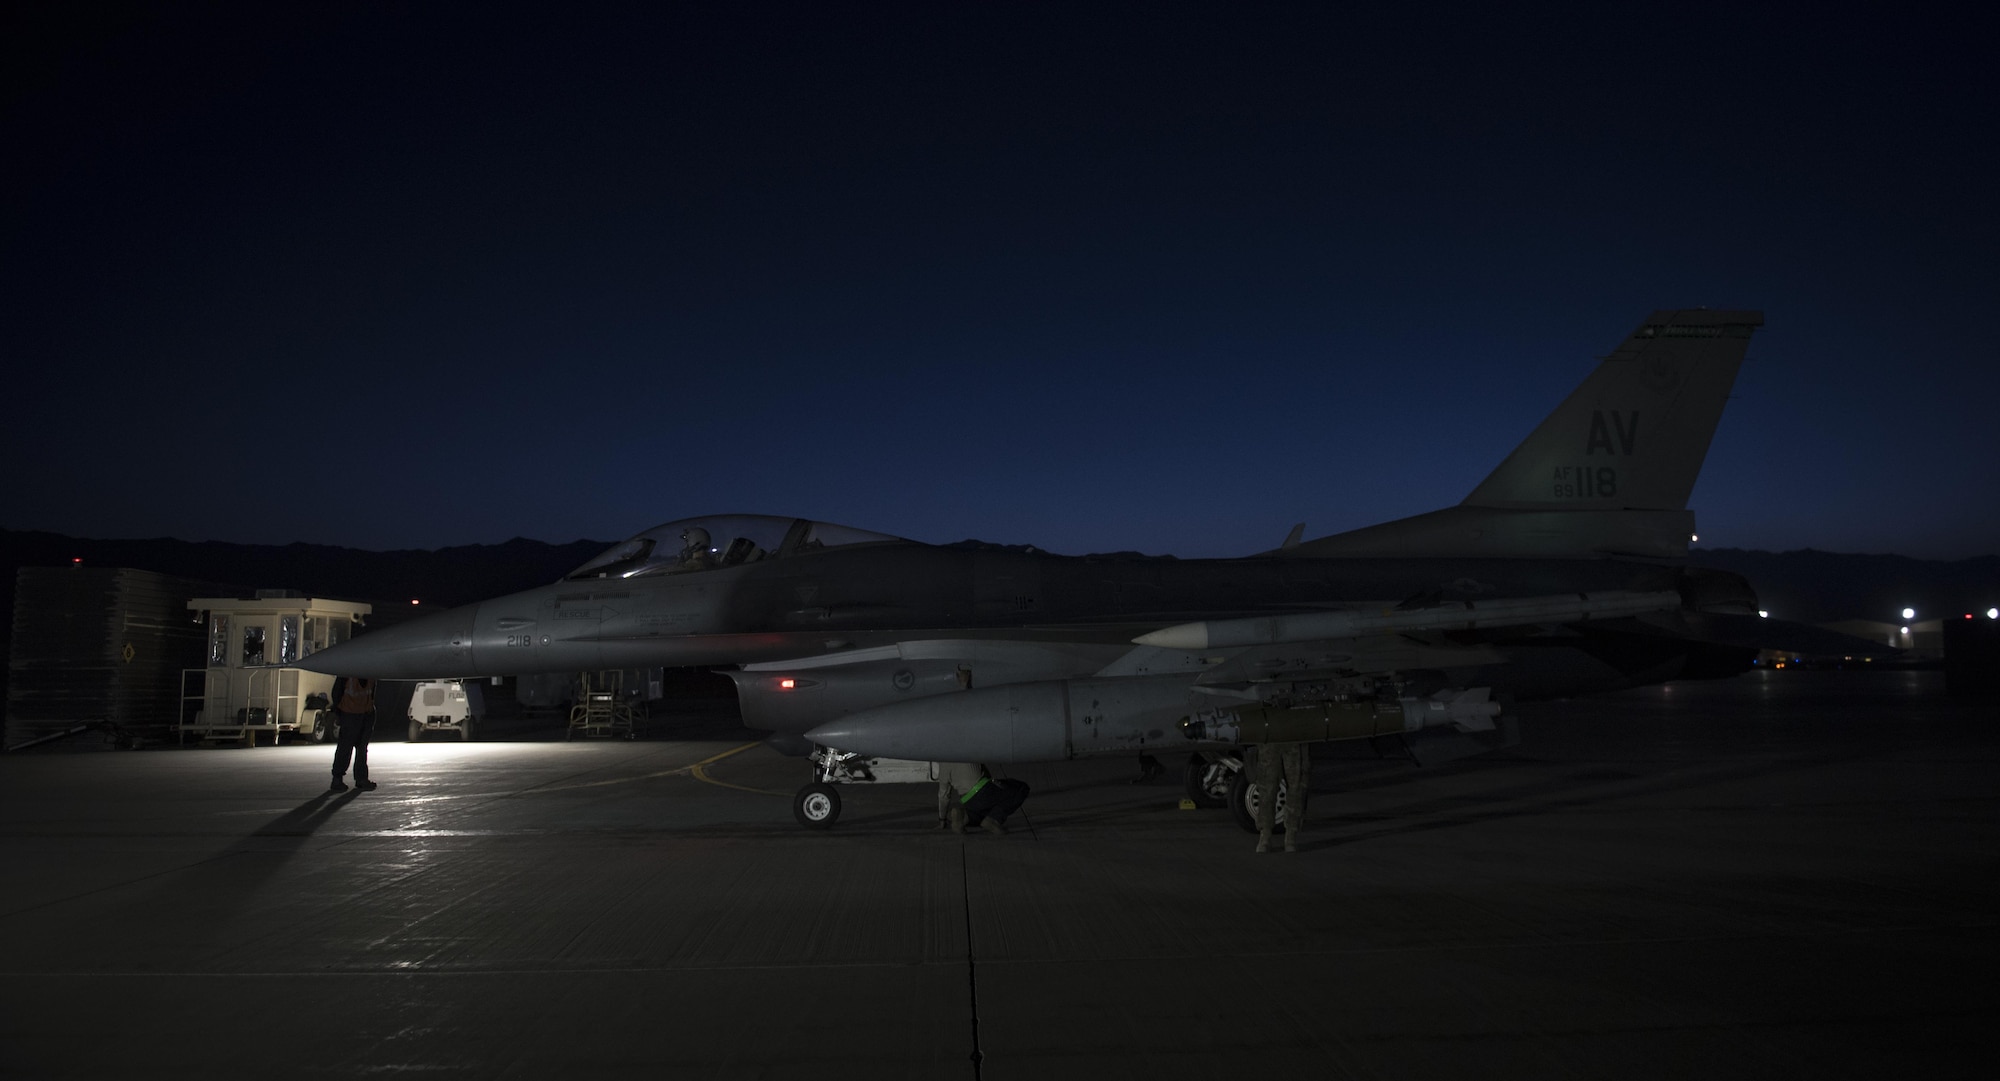 Maintainers ensure an F-16 Fighting Falcon assigned to the 555th Expeditionary Fighter Squadron is ready for takeoff at Bagram Airfield, Afghanistan, June 16, 2017. F-16s deployed to Bagram Airfield provide over watch and close air support to U.S. and coalition forces through the Afghanistan area of operation, enabling coalition forces to focus on training, advising and assisting Afghanistan’s military and security forces. (U.S. Air Force photo by Staff Sgt. Benjamin Gonsier) 